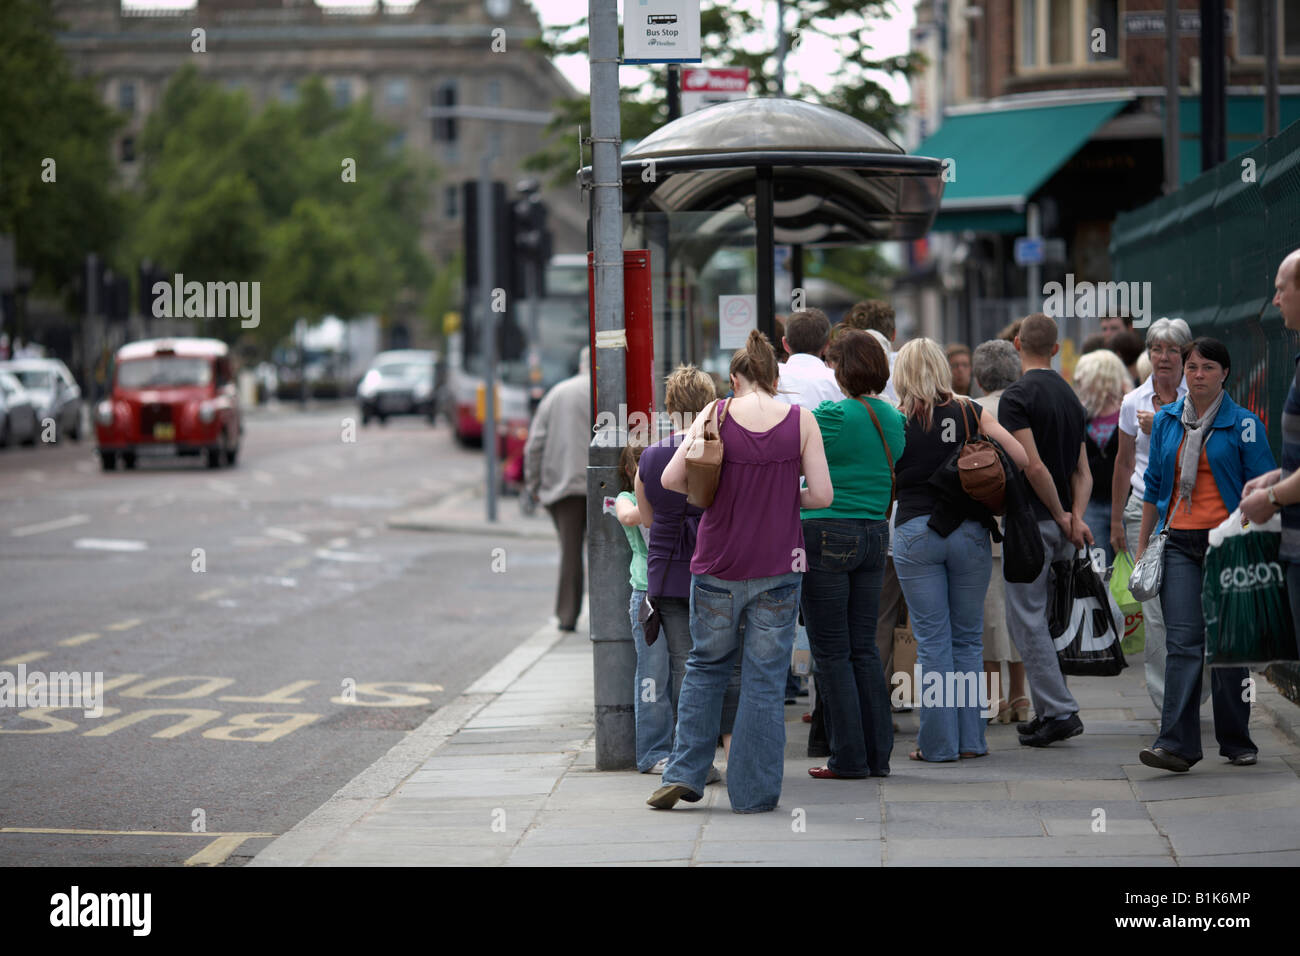 people queuing at a bus stop during saturday shopping belfast northern ireland Stock Photo